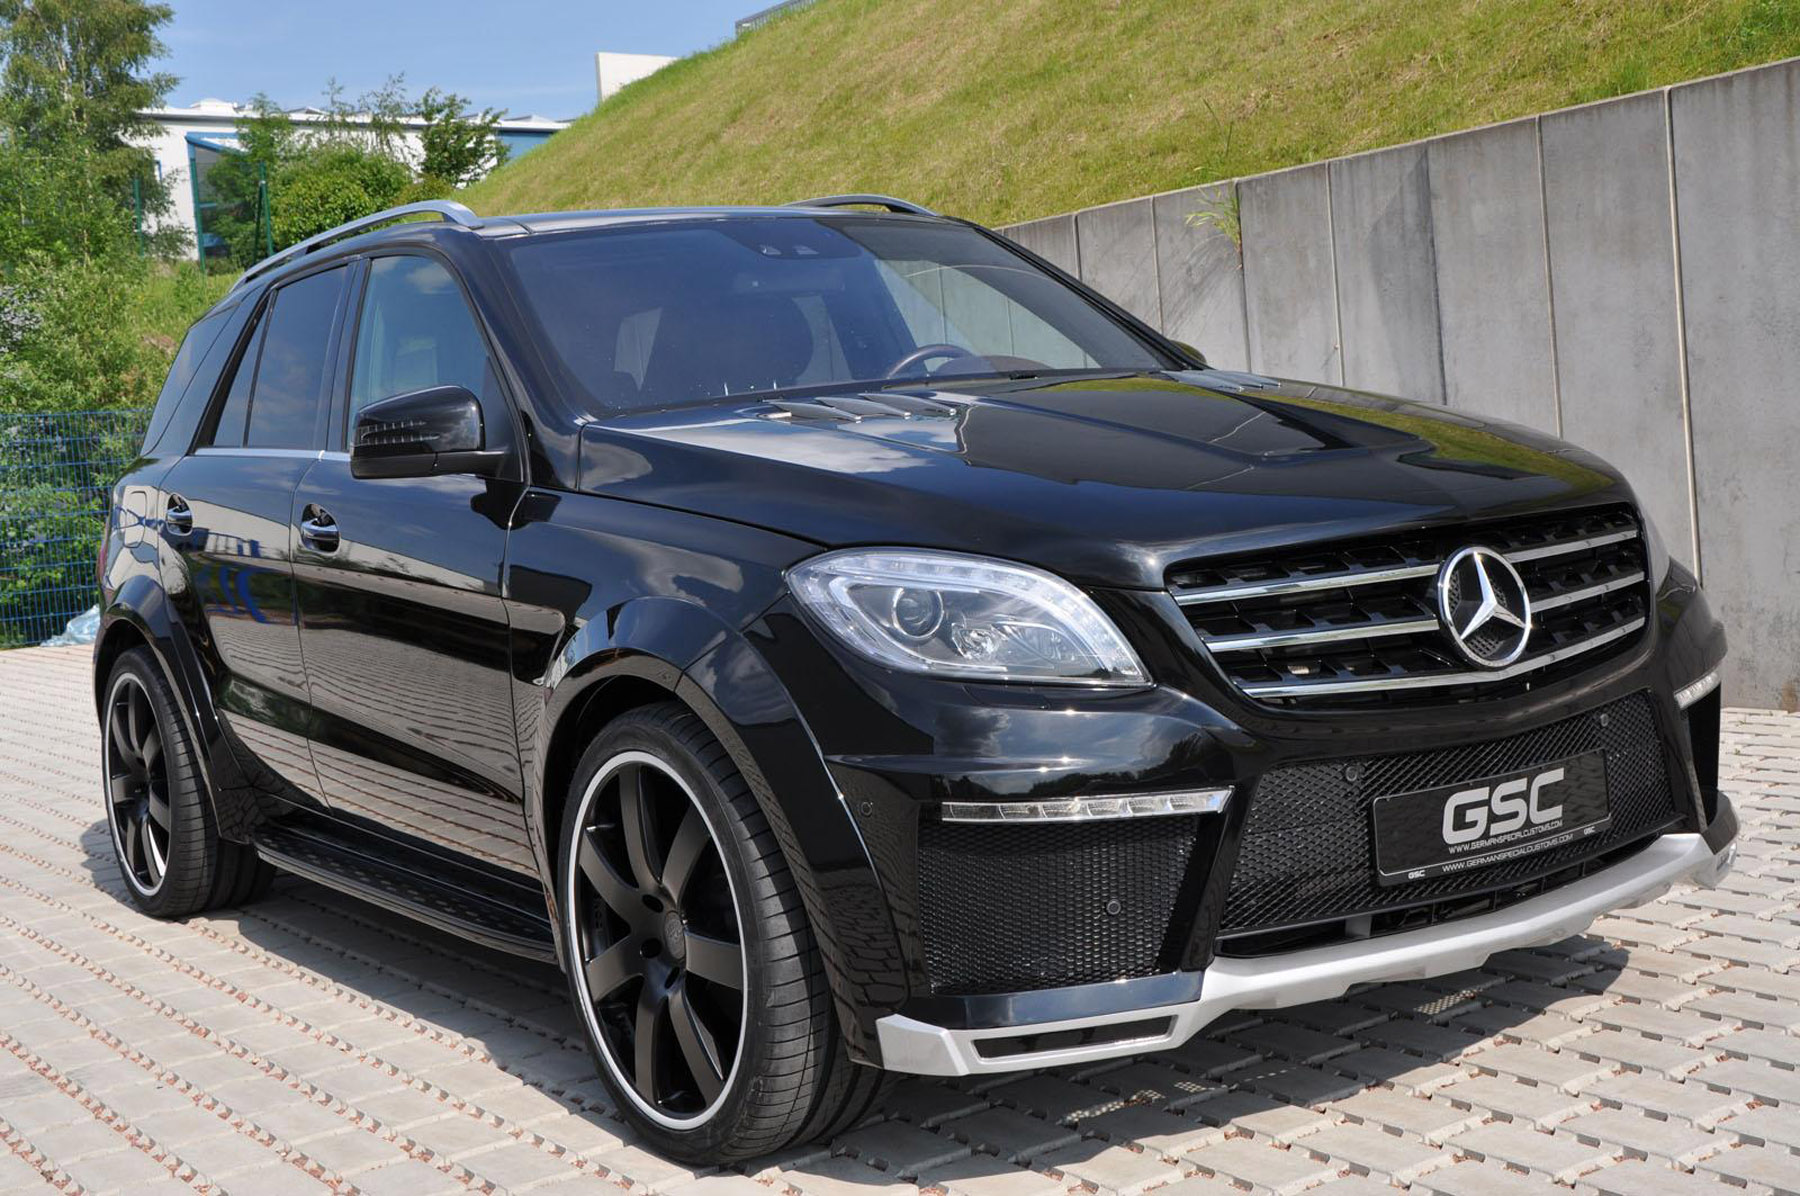 A mercedes benz w169 with lowered suspesion and a widebody kit on